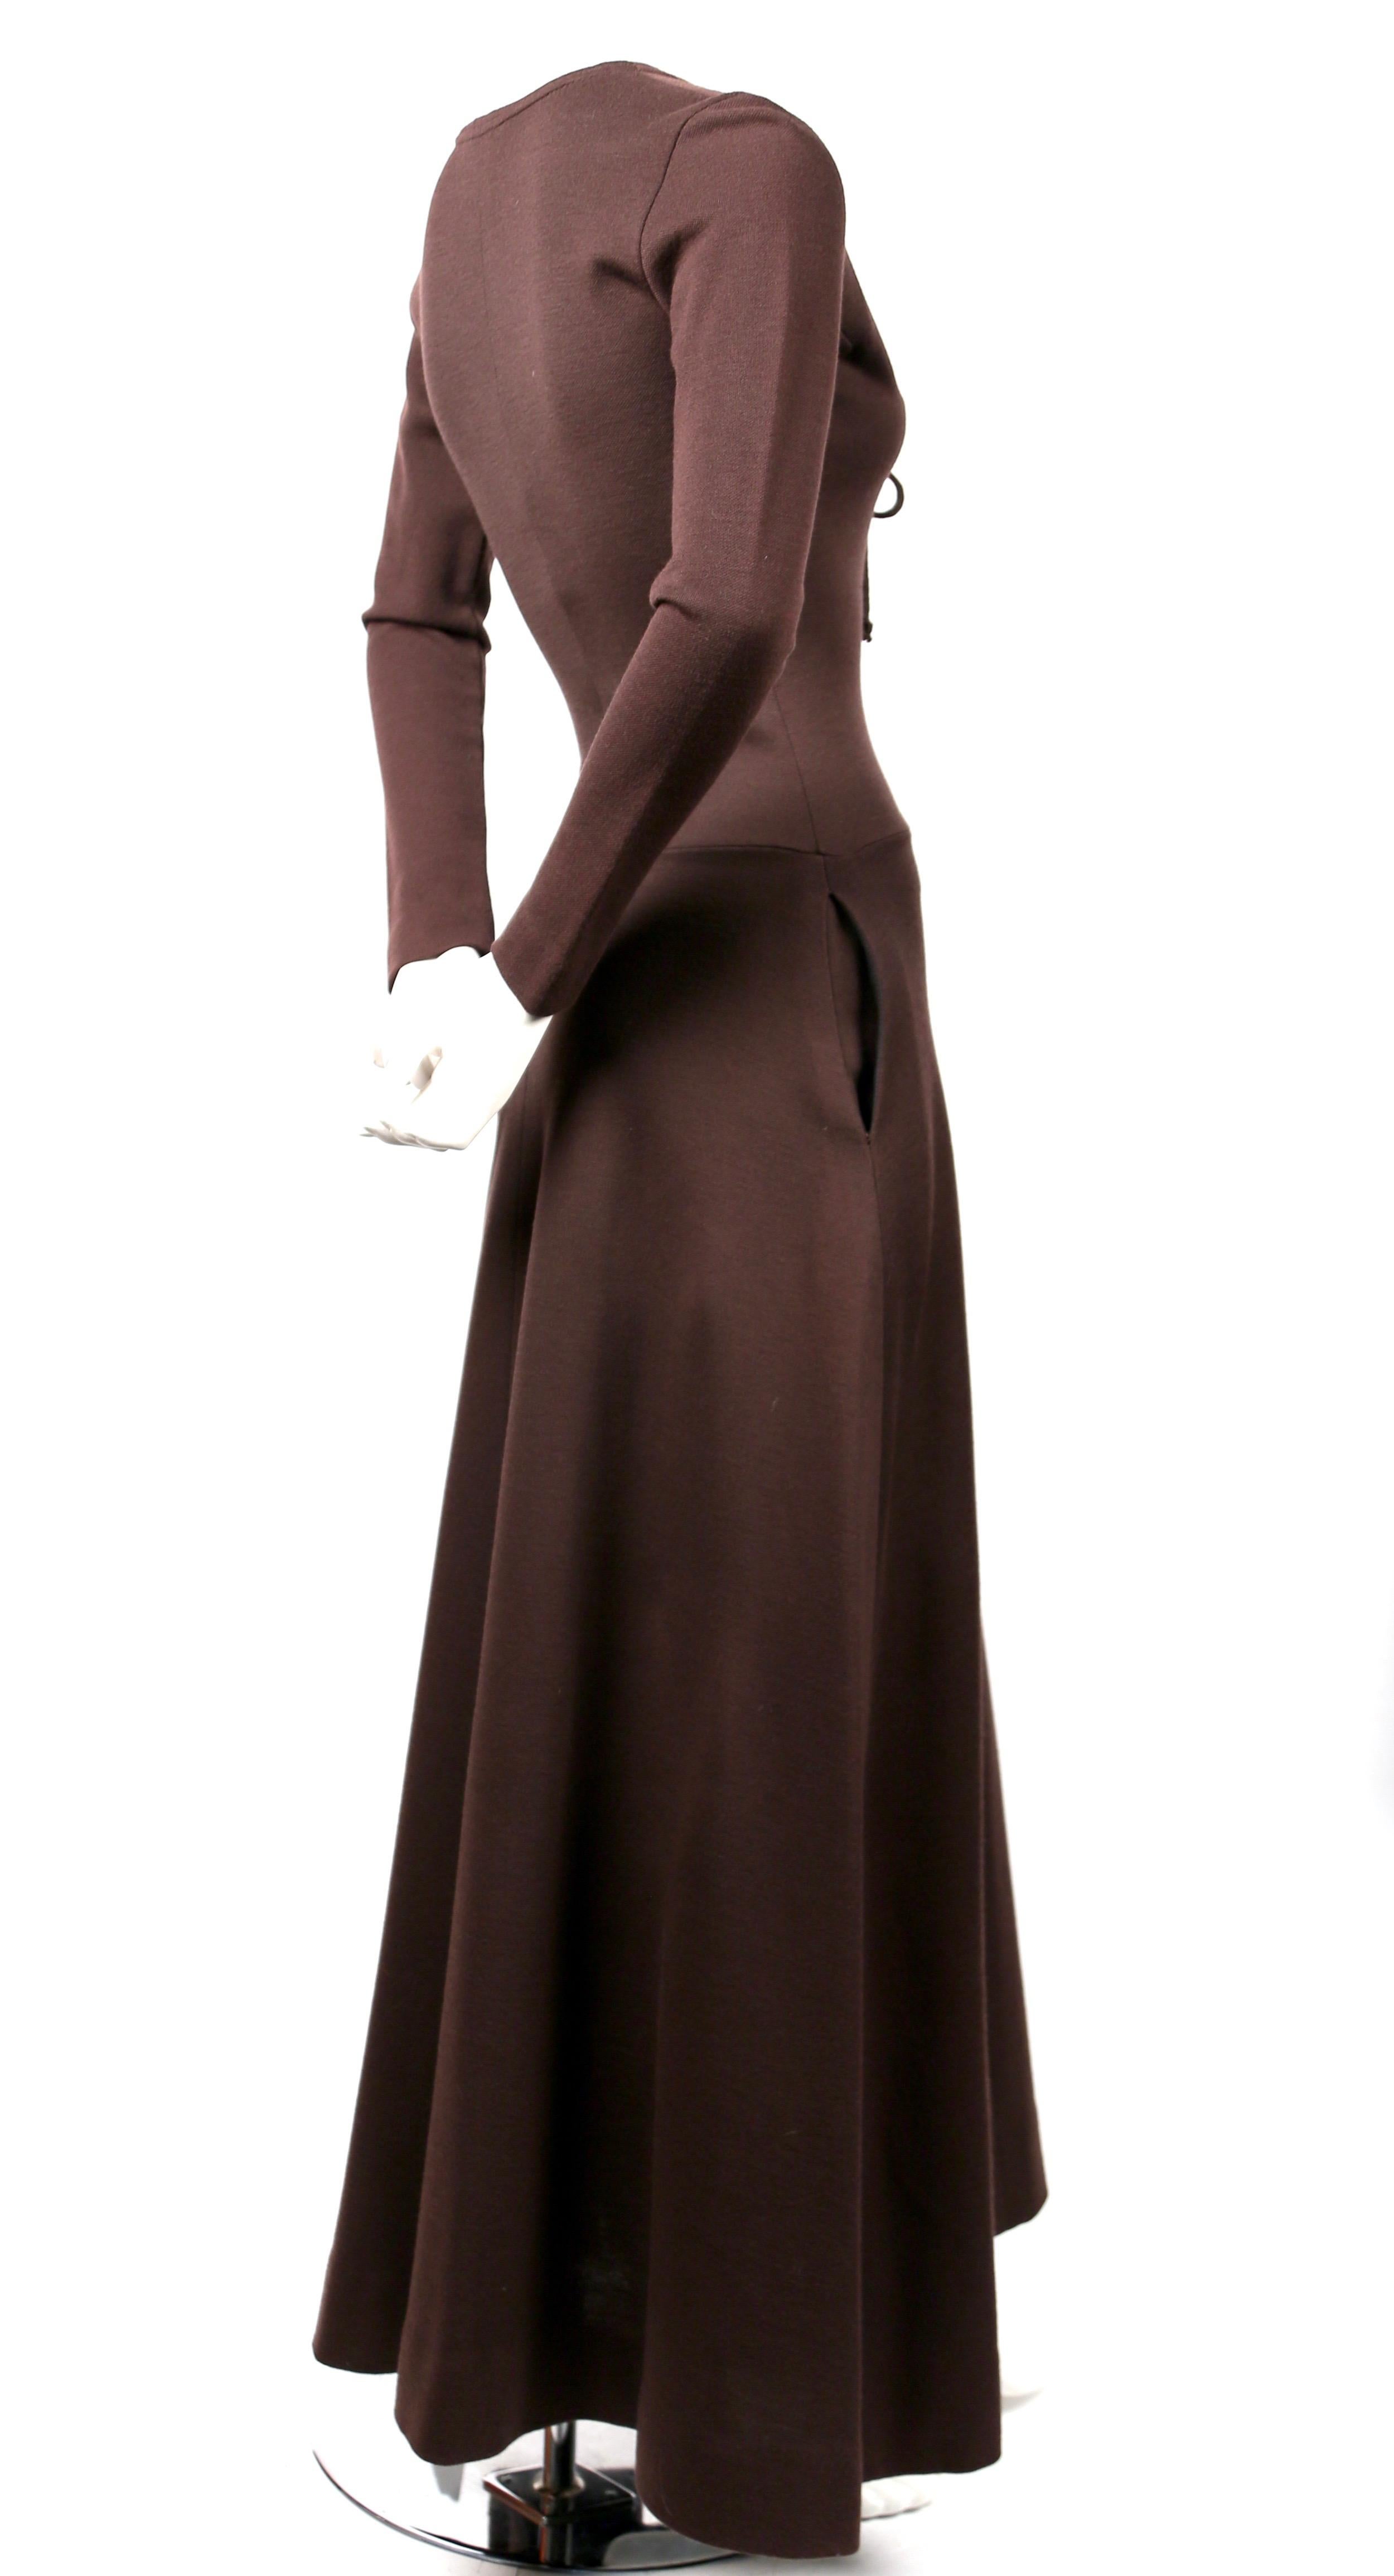 1960's RUDI GERNREICH dress with plunging neckline In Good Condition For Sale In San Fransisco, CA